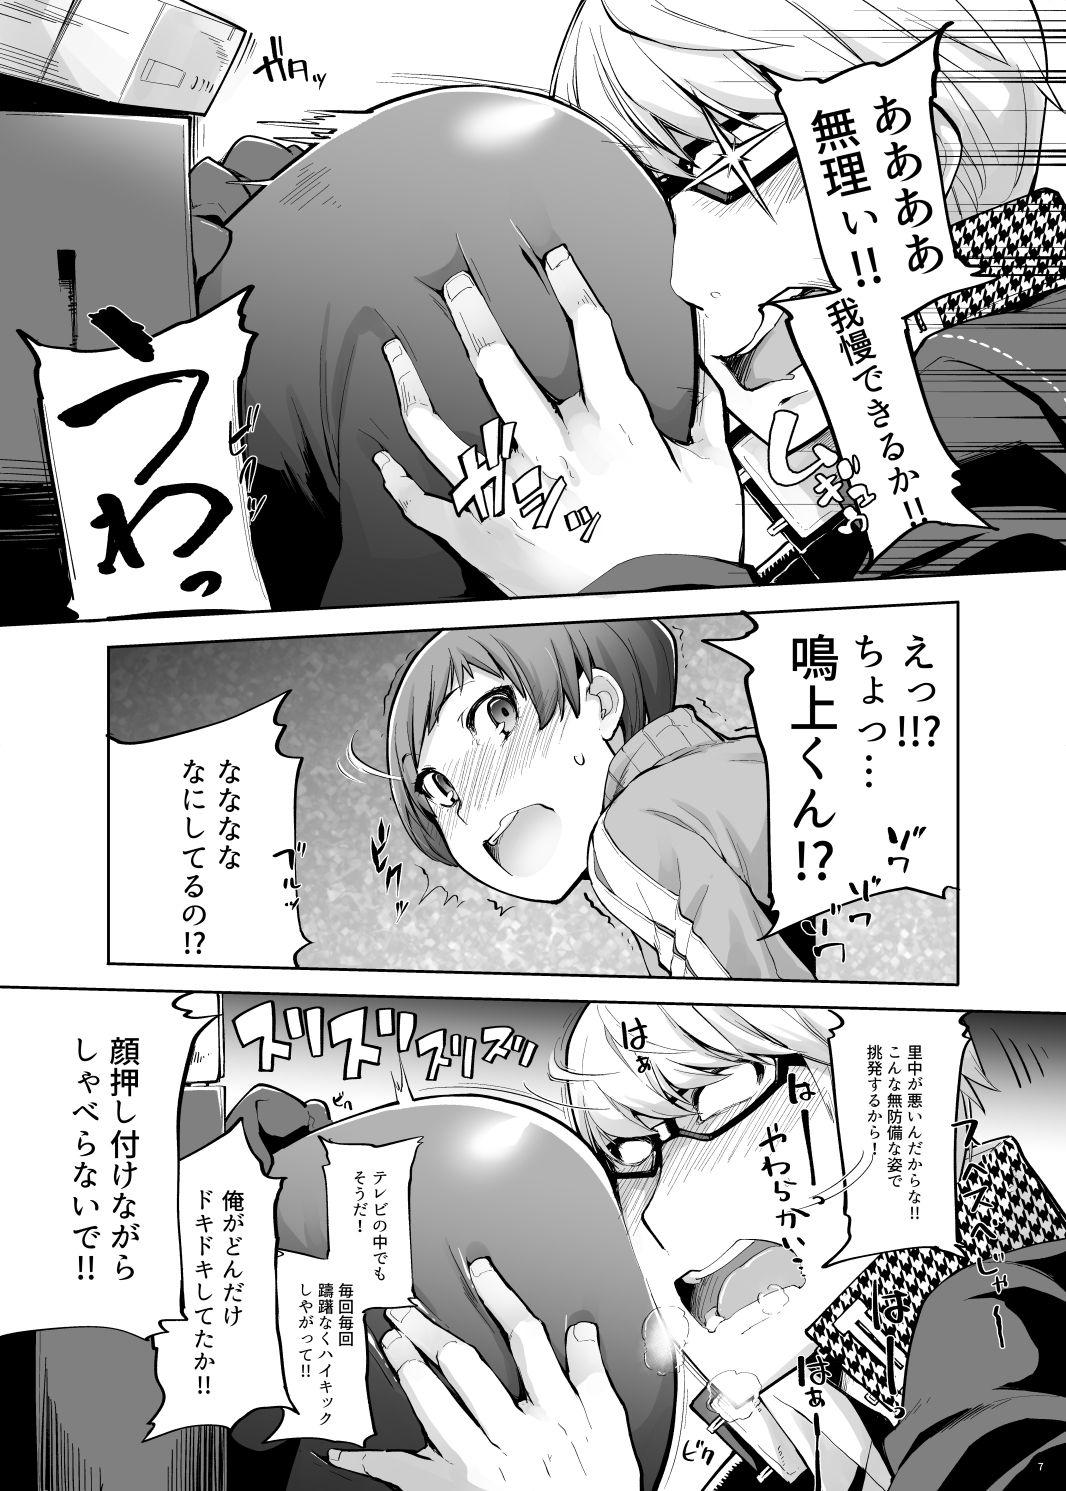 Spy Camera Kabe Chie - Persona 4 Big Tits - Page 8